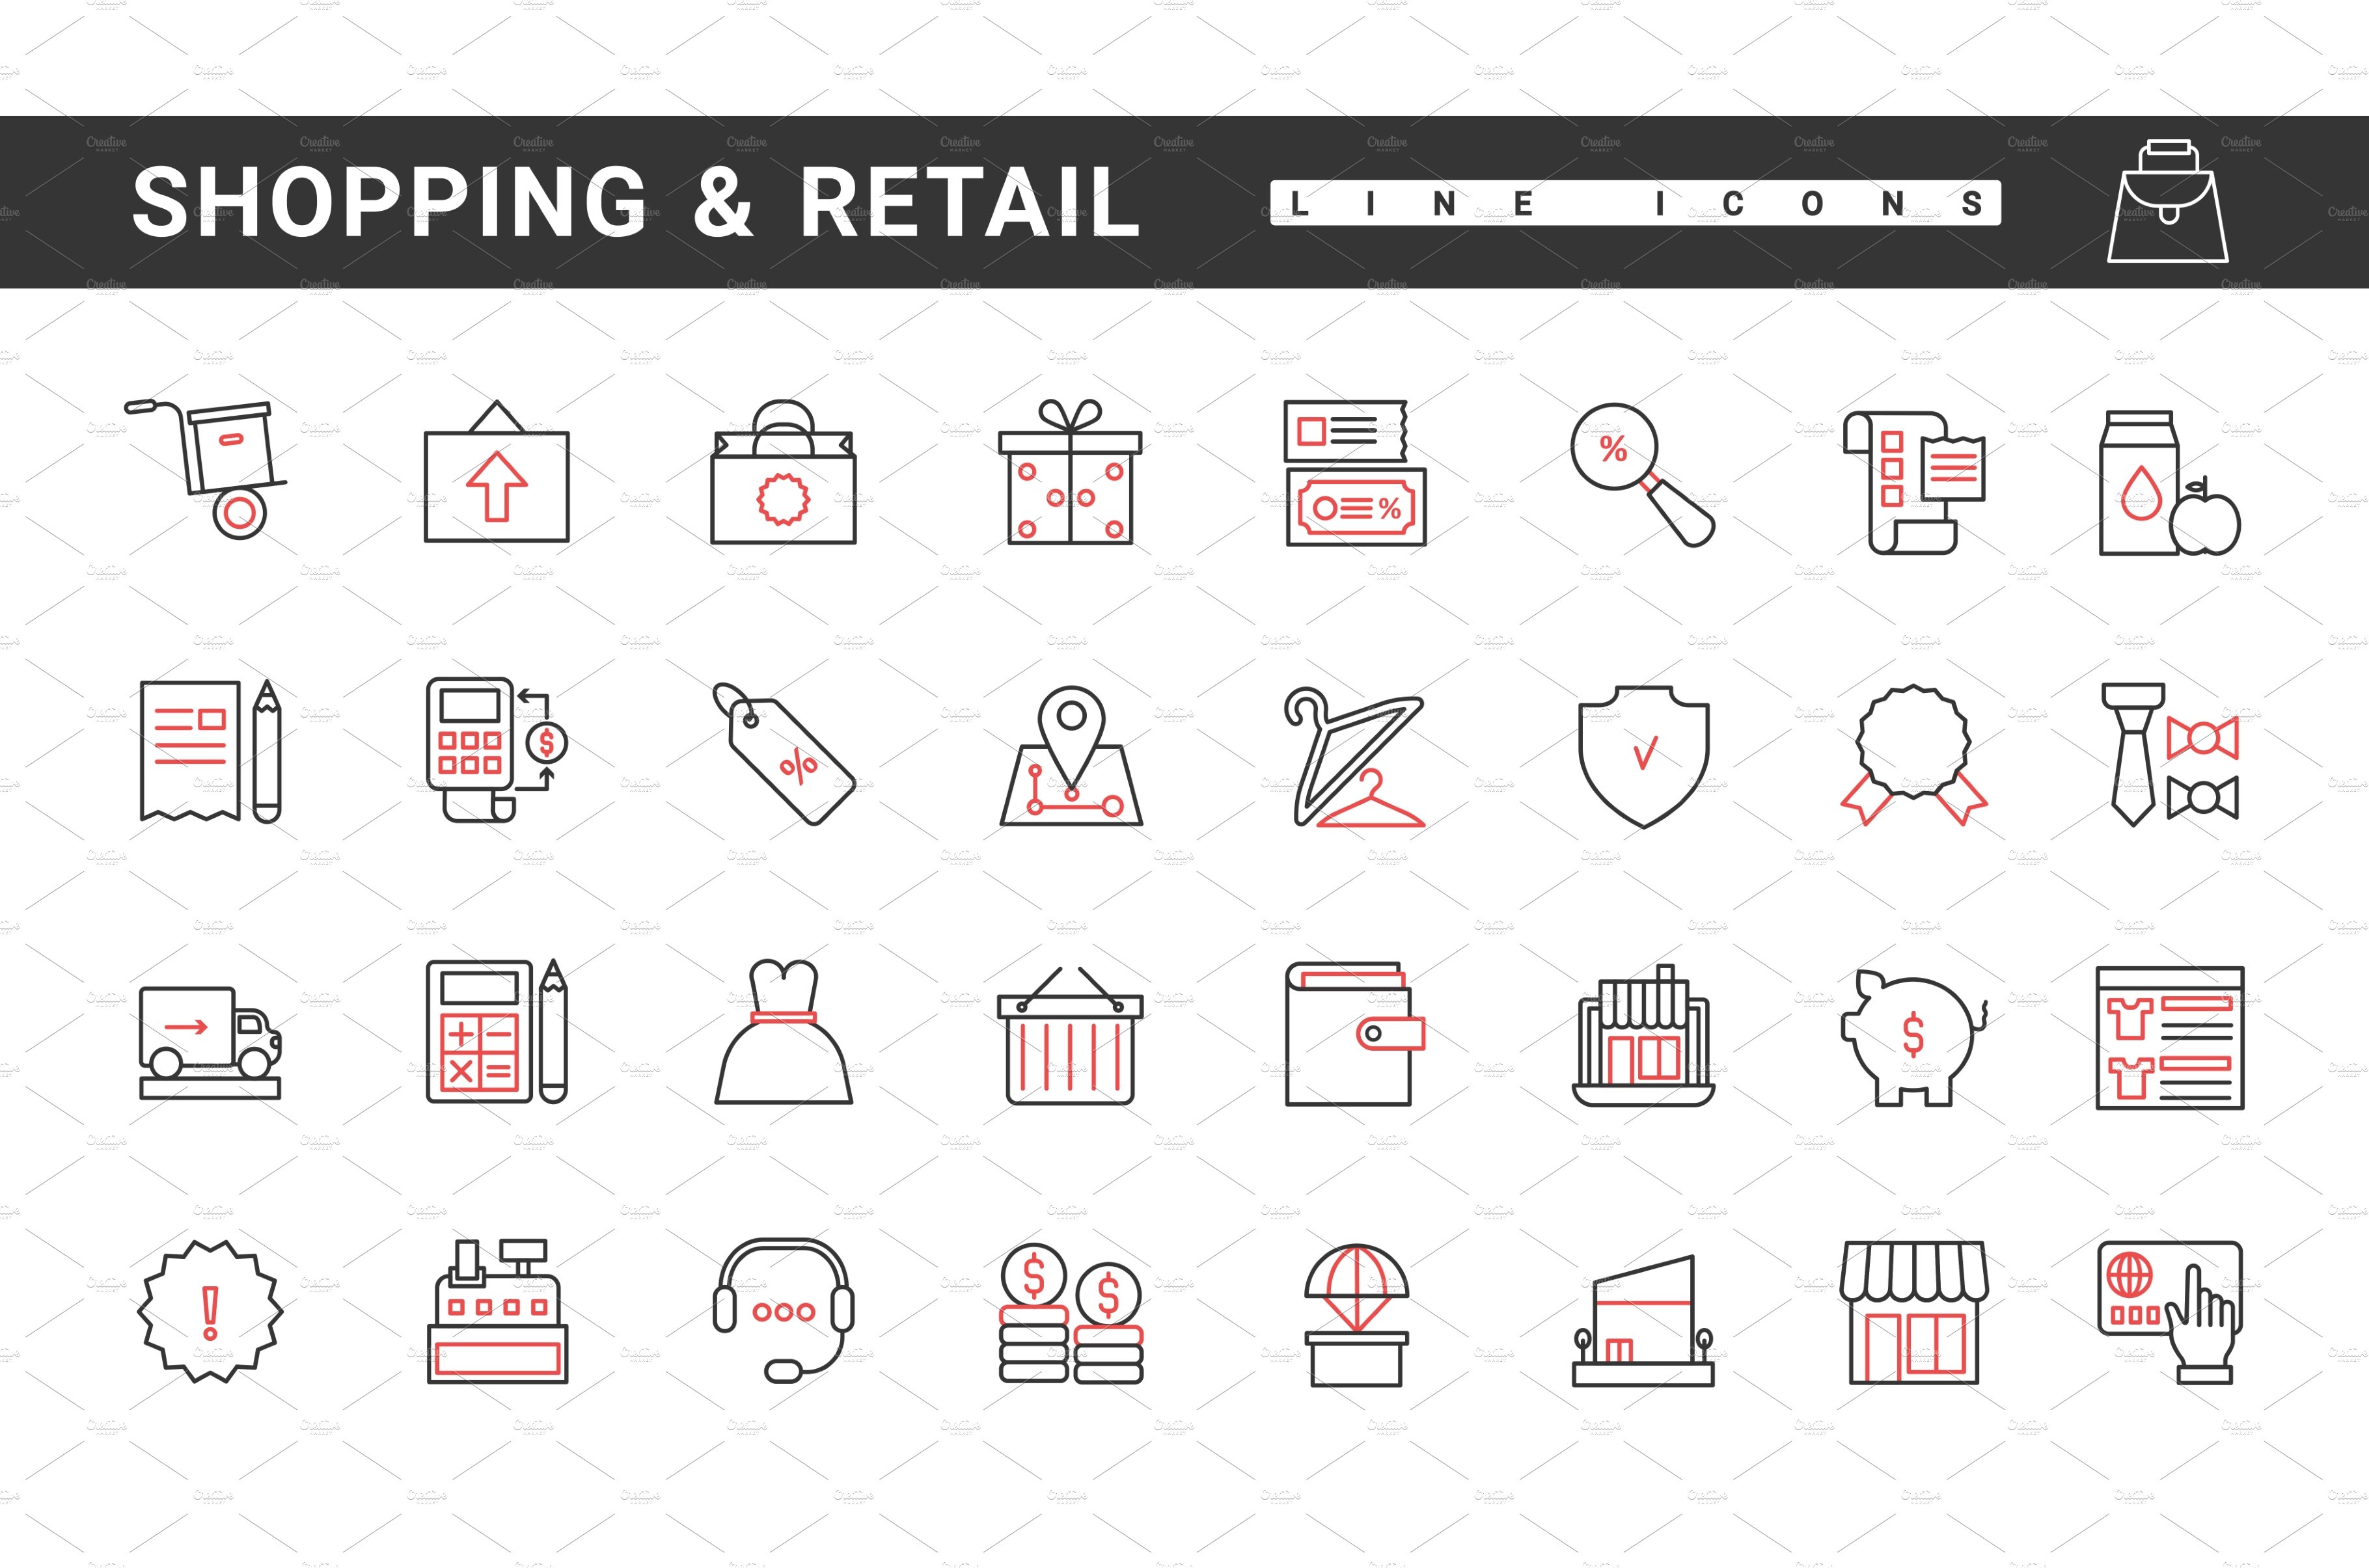 Retail online commerce line icons cover image.